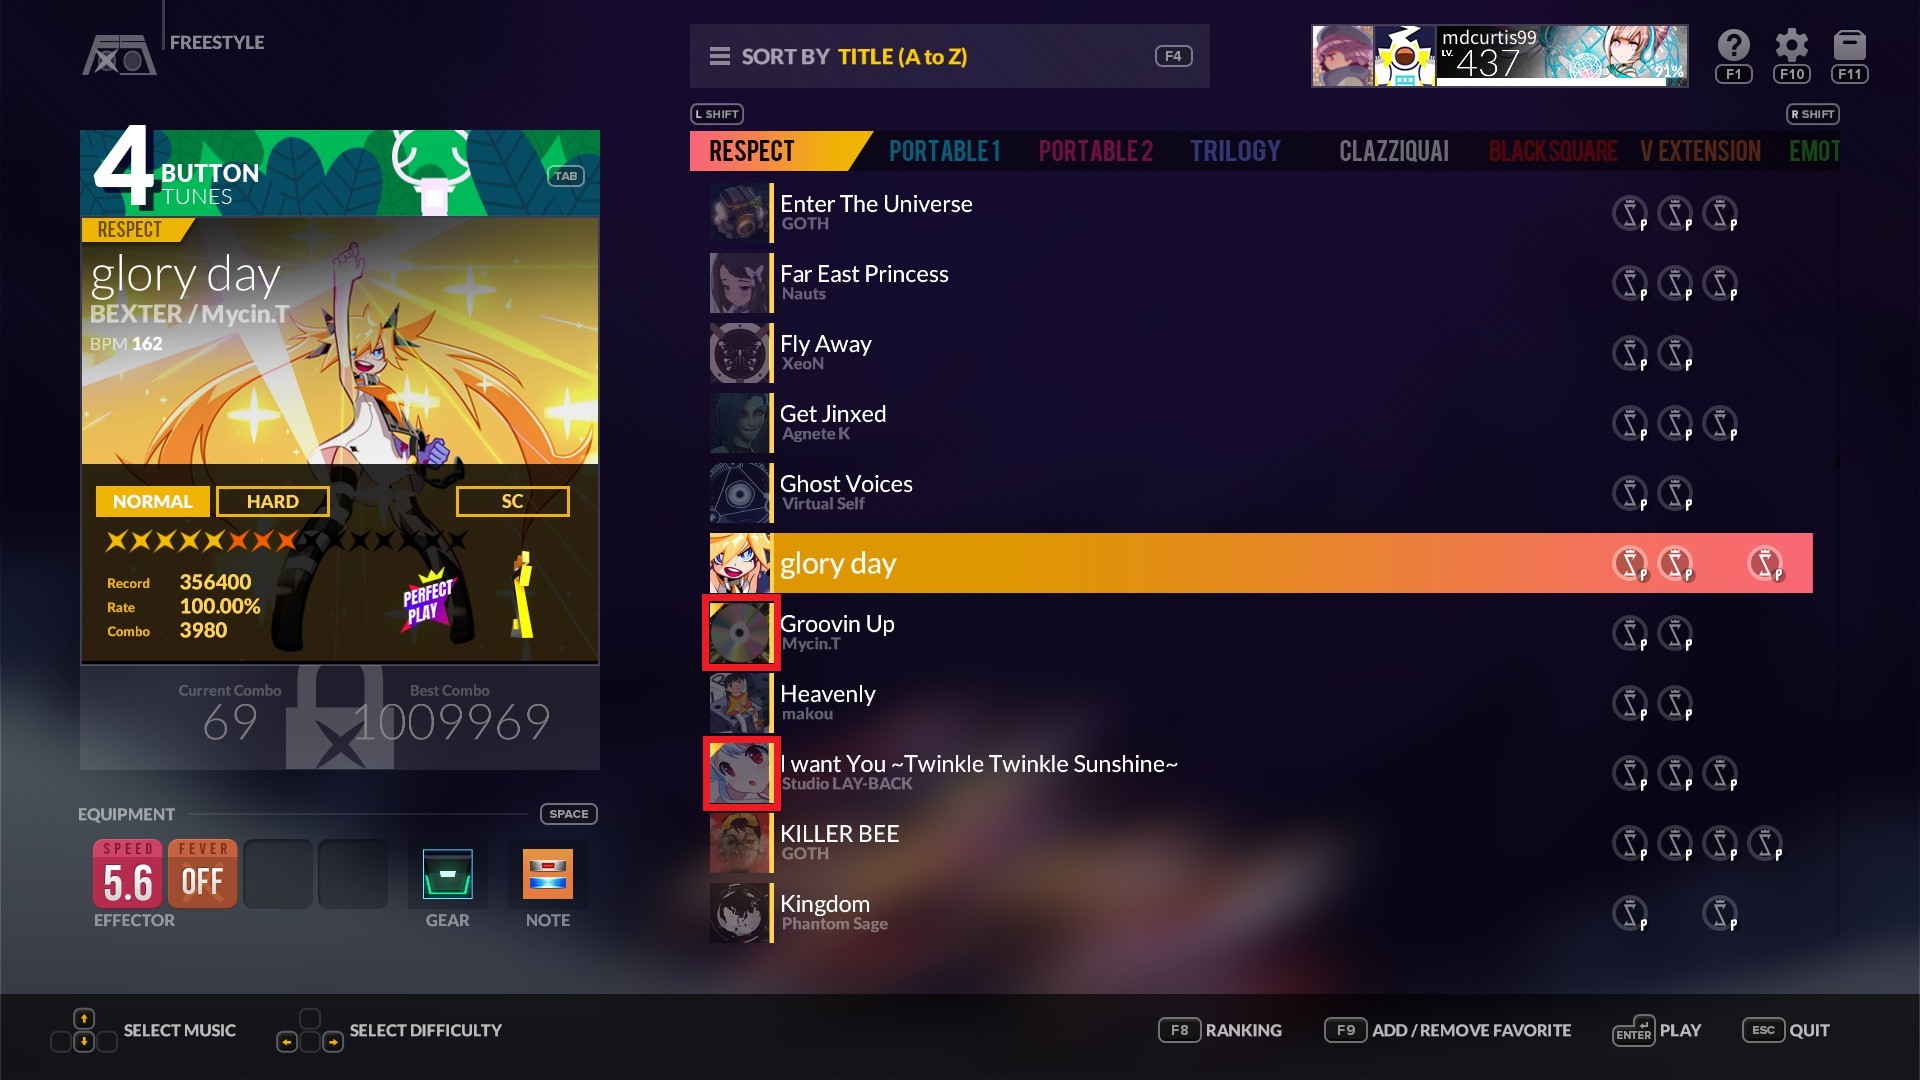 DJMAX RESPECT V - Full Walkthough + All Achievements Guide Complete - Free Style - 0106ADE